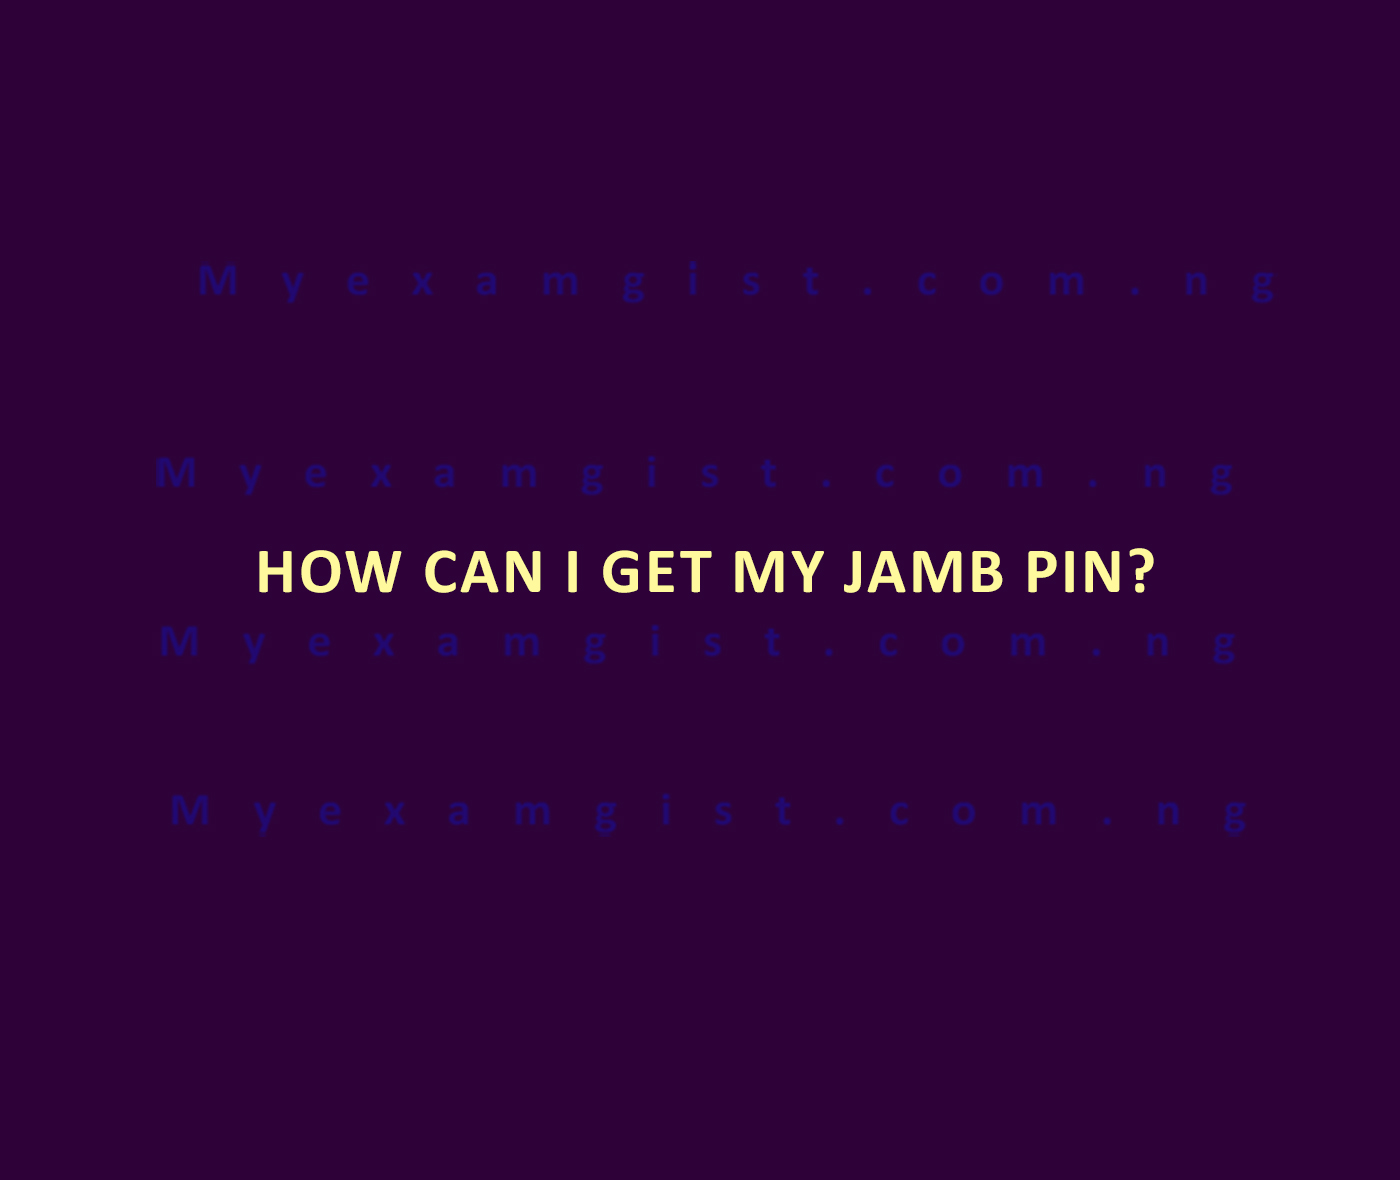 How can I get my JAMB PIN?